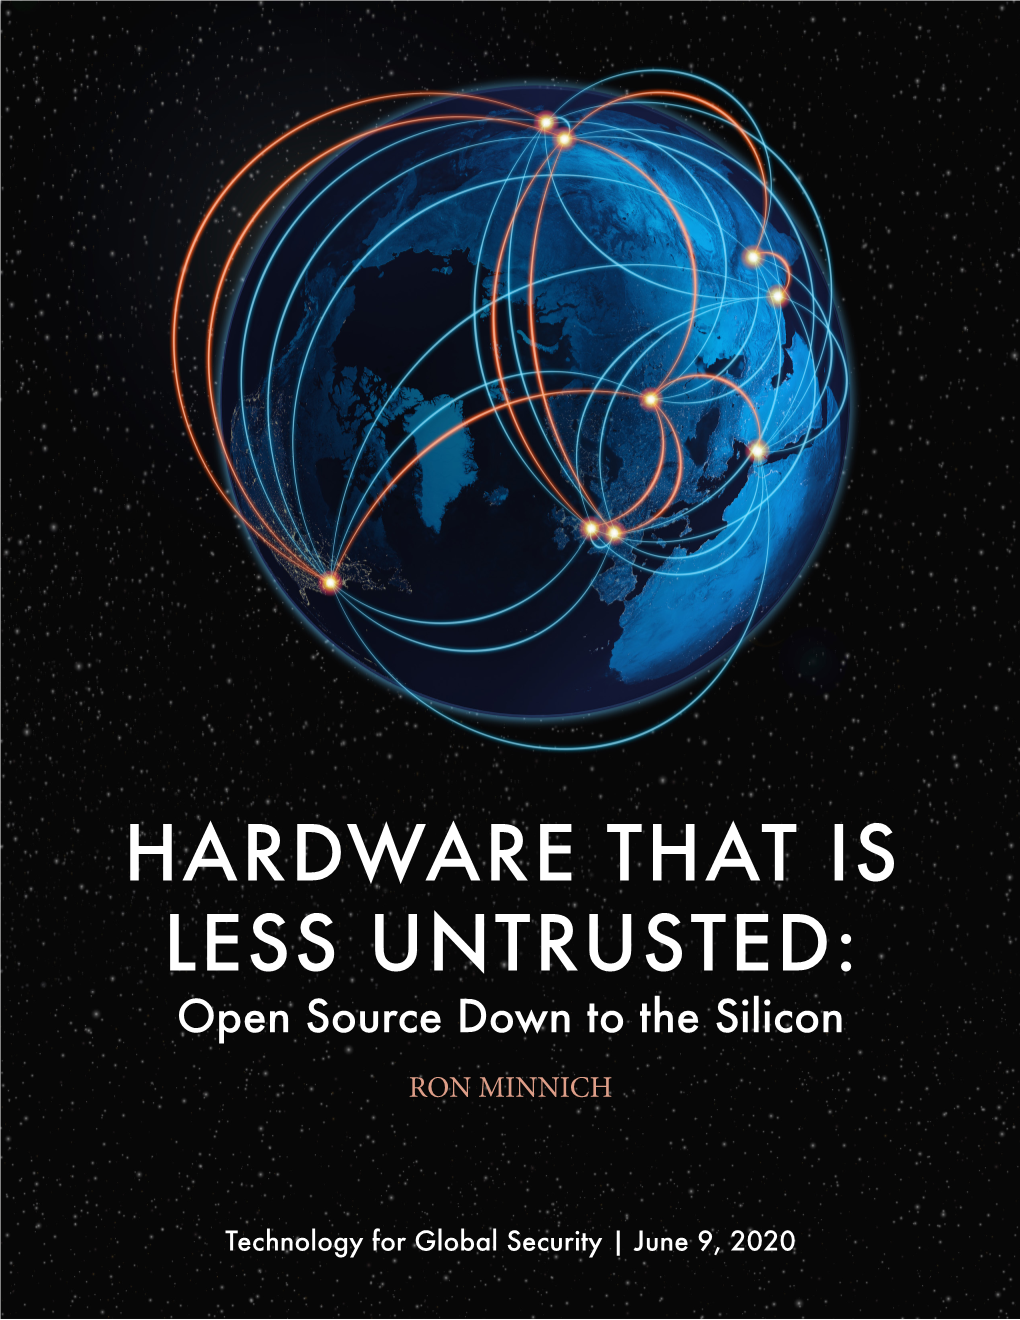 HARDWARE THAT IS LESS UNTRUSTED: Open Source Down to the Silicon